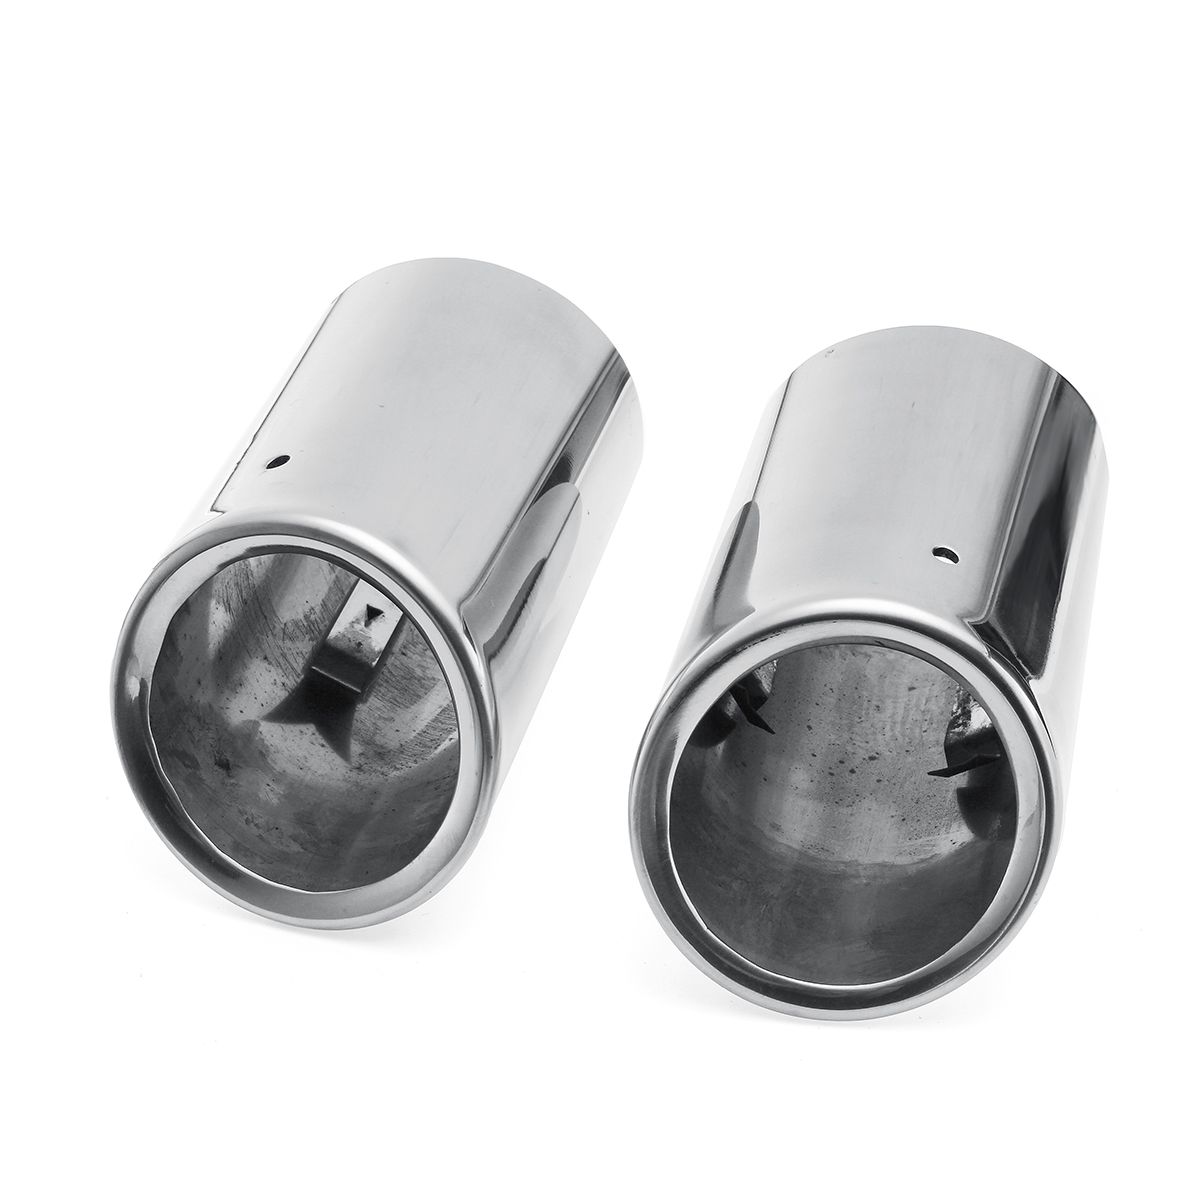 2PCS-Stainless-Steel-Exhaust-Pipe-Muffler-Tail-Tip-Pipe-For-Jaguar-XE-R-Sport-1701199